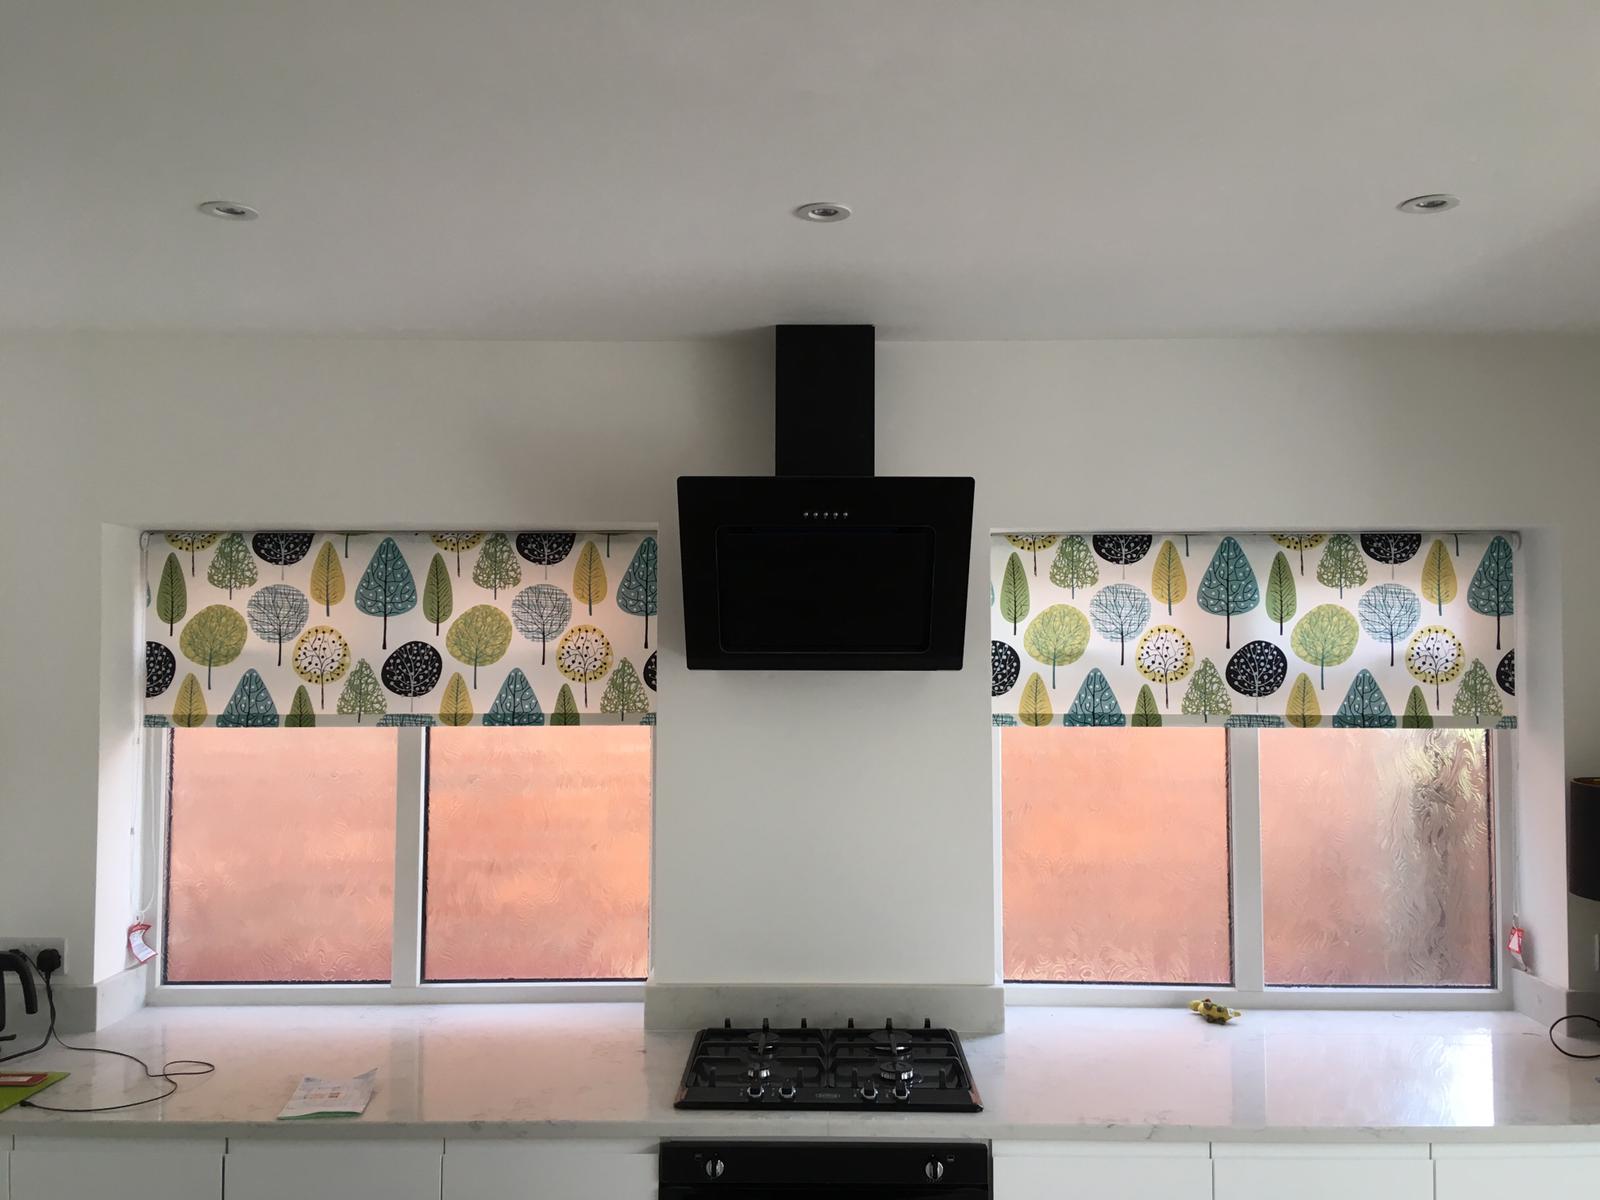 Suppliers of Patterned Roller Blinds Options UK